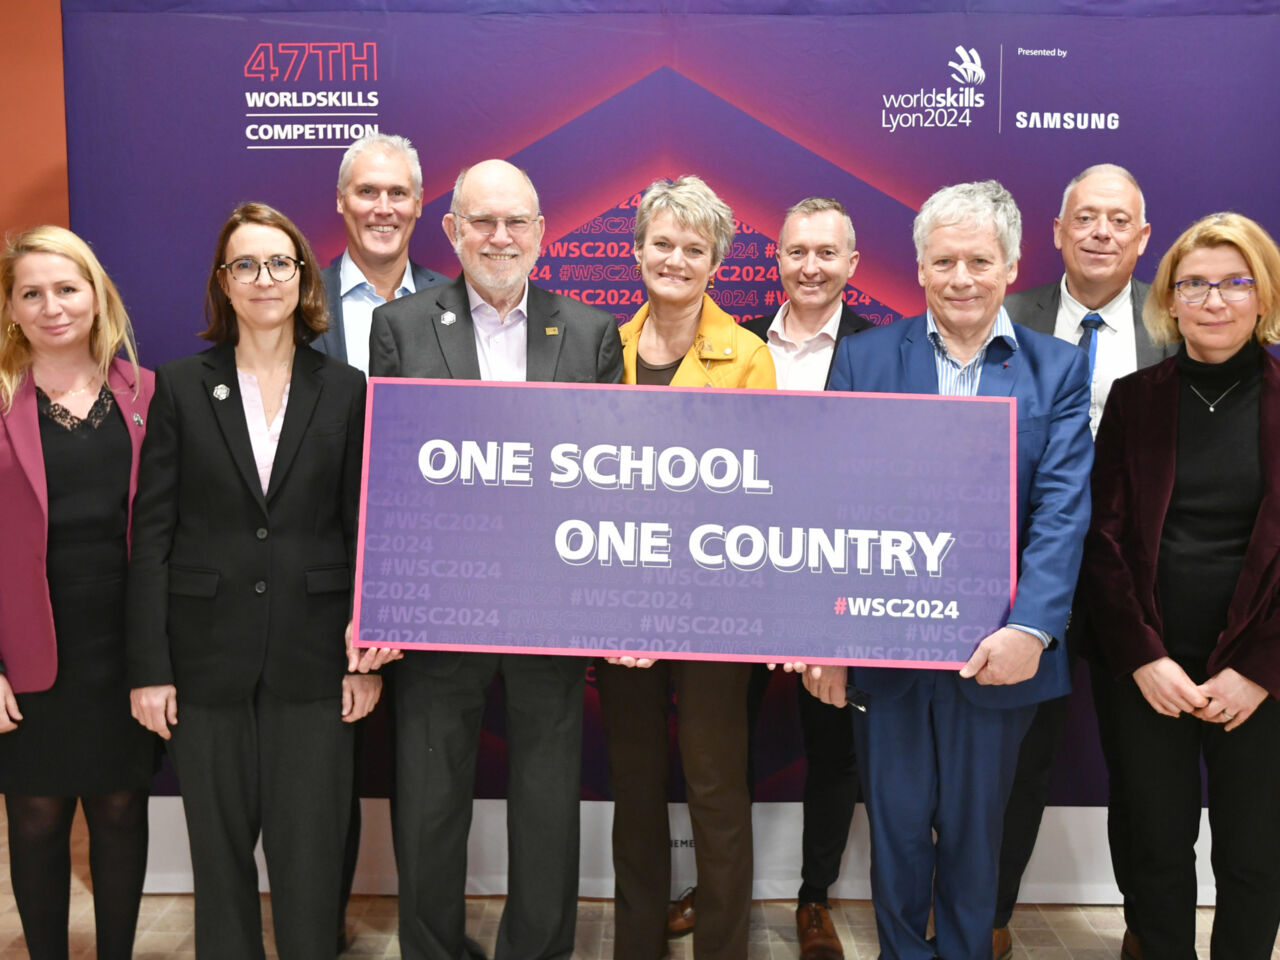 Representatives from WorldSkills International and WorldSkills Lyon 2024 stand with a poster for official launch of One School One Country in Lyon, France